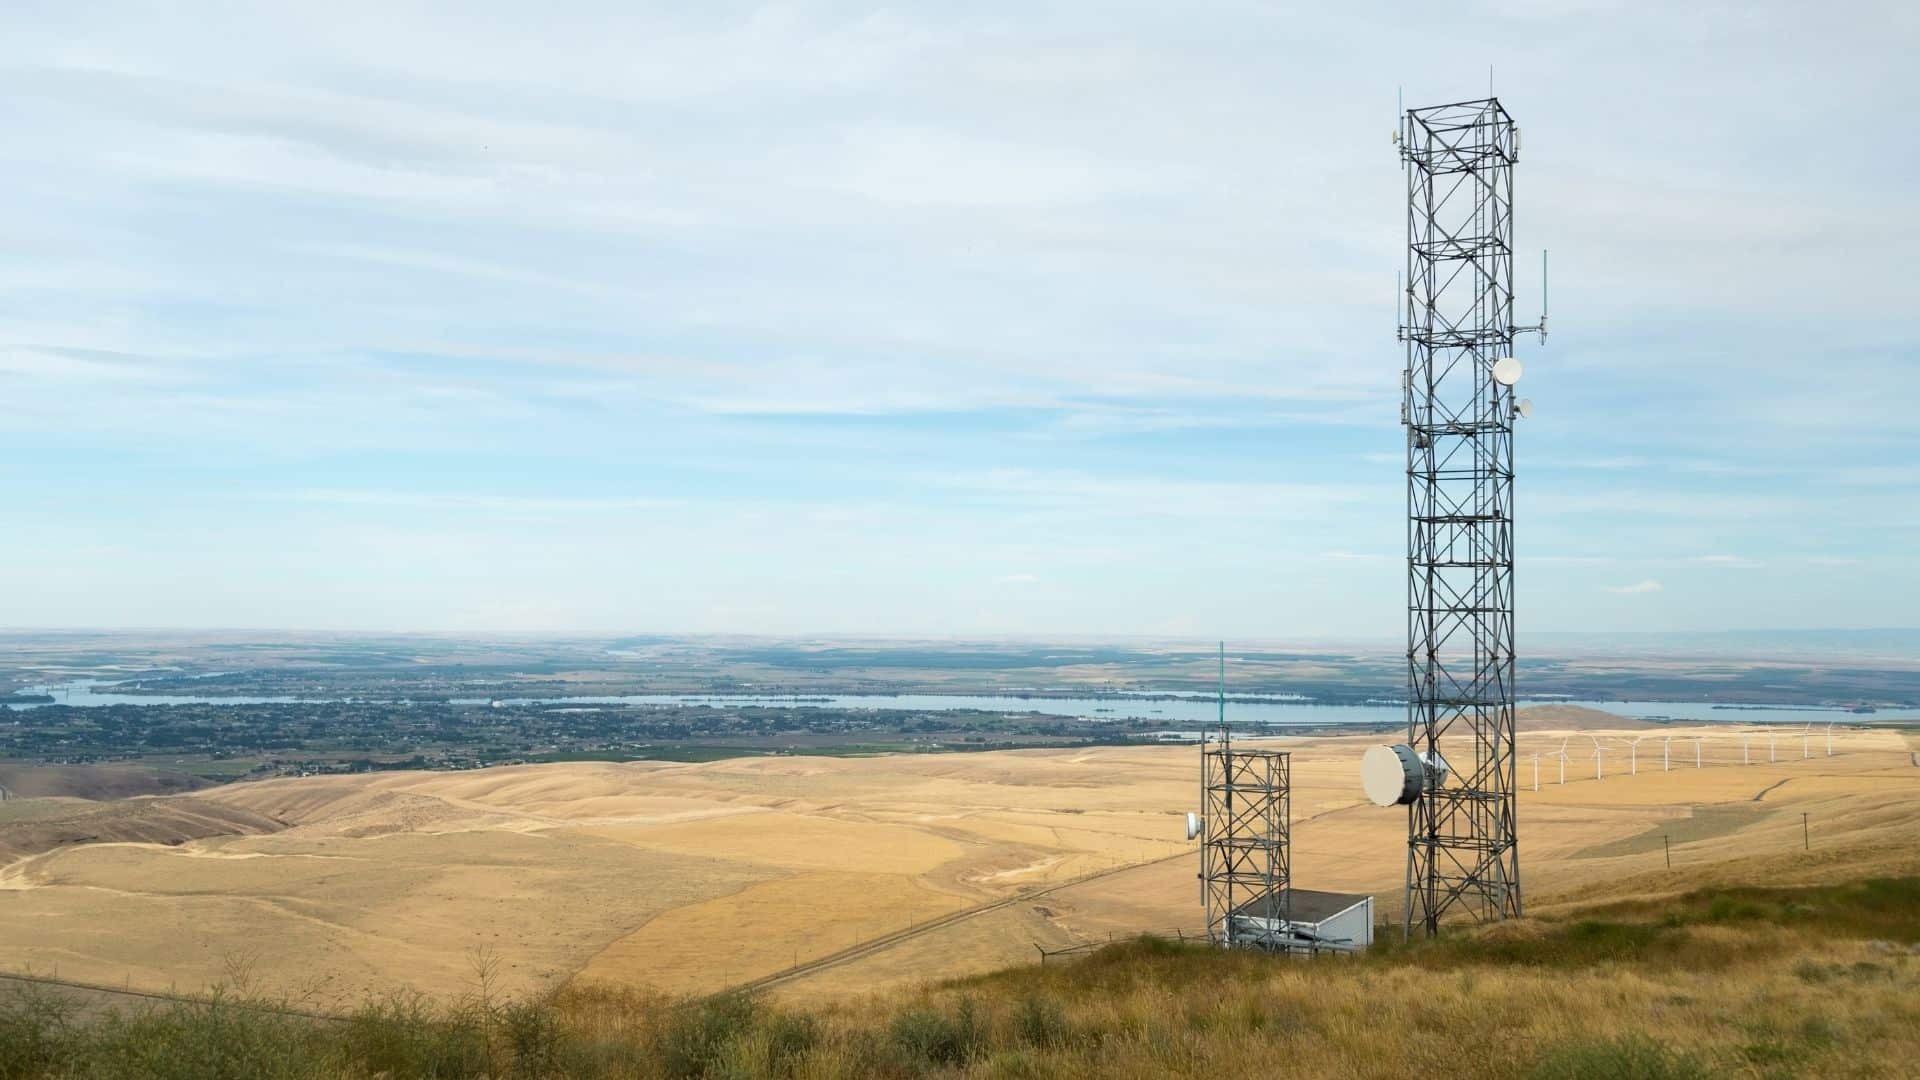 Telecommunications Tower overlooking Tri-Cities (Kennewick, Pasco, Richland)